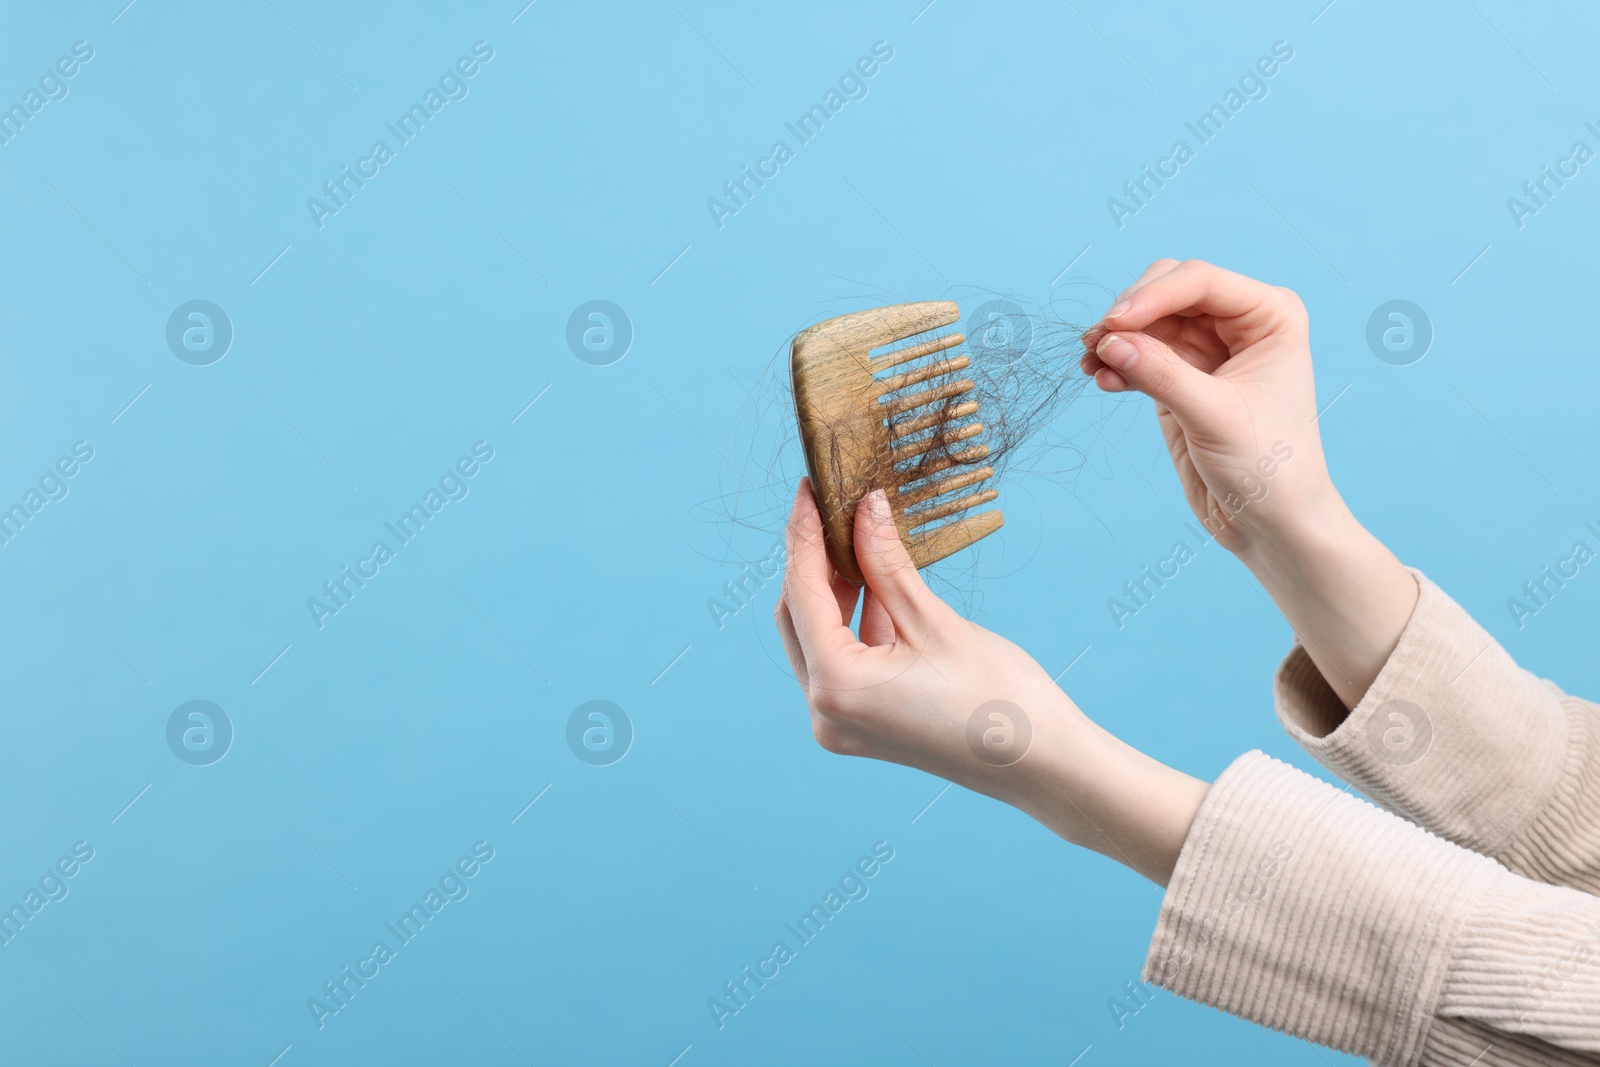 Photo of Woman untangling her lost hair from comb on light blue background, closeup and space for text. Alopecia problem